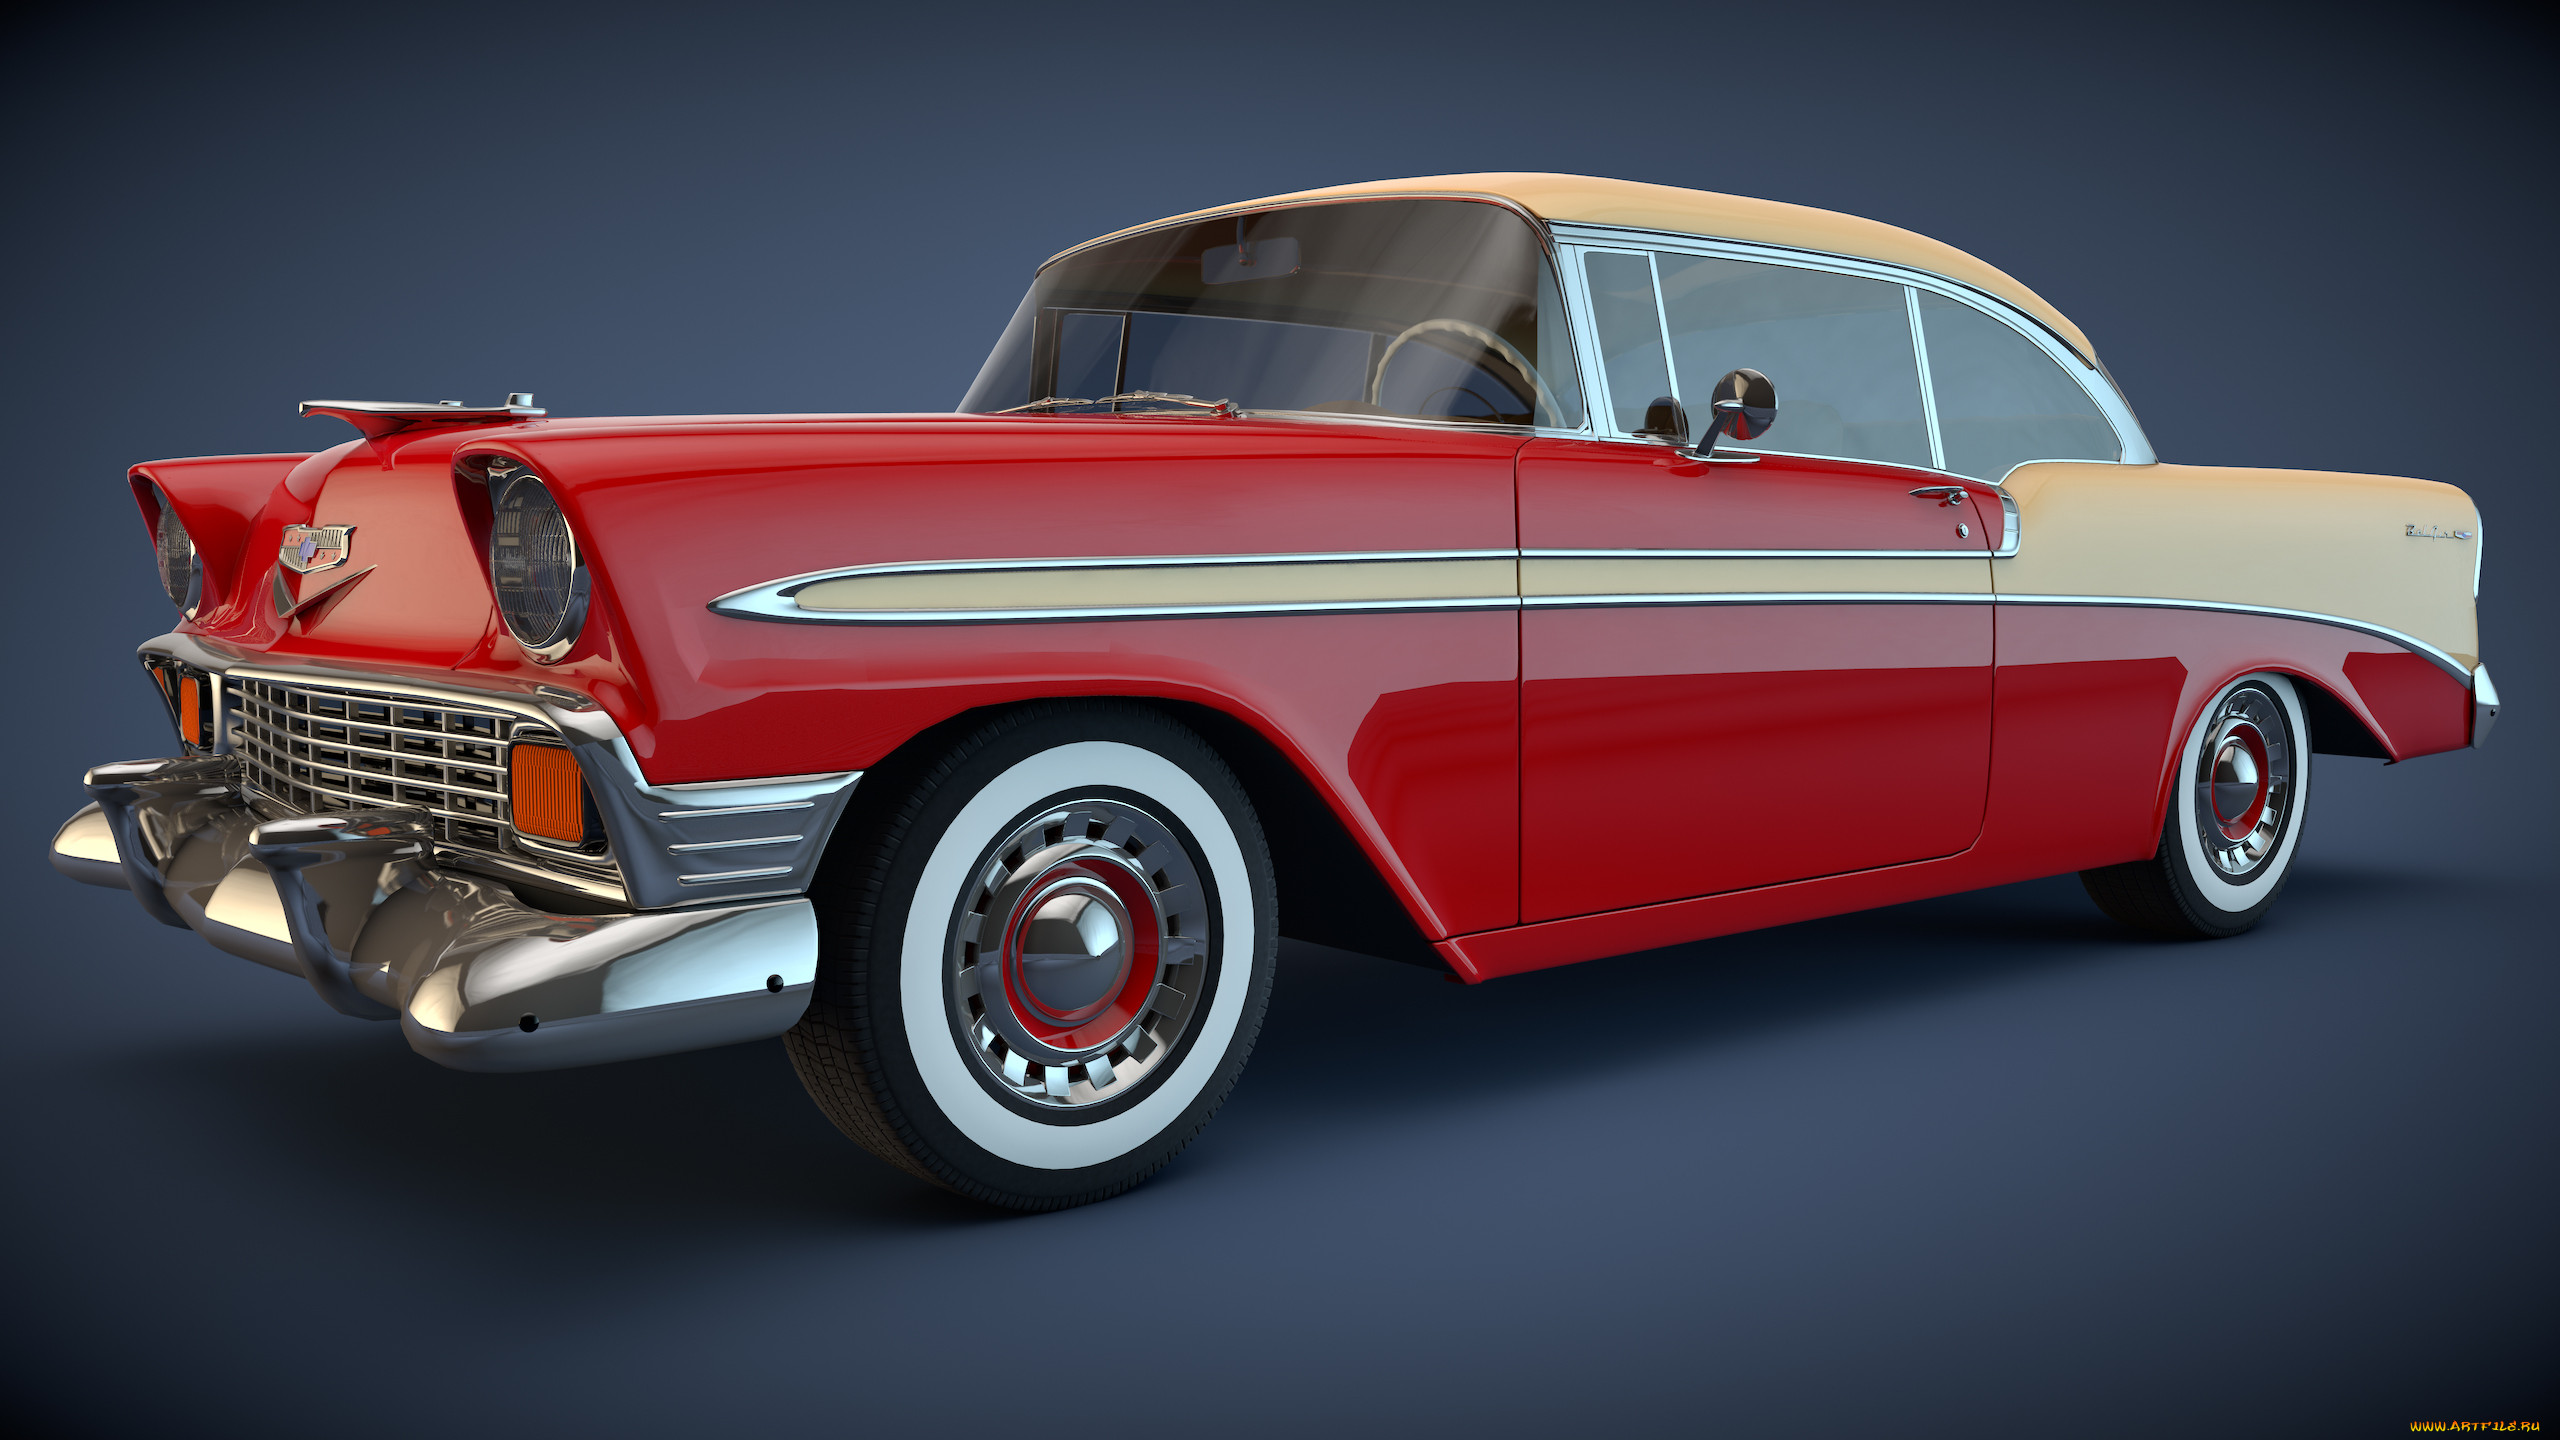 , 3, coupe, 1956, bel, chevrolet, air